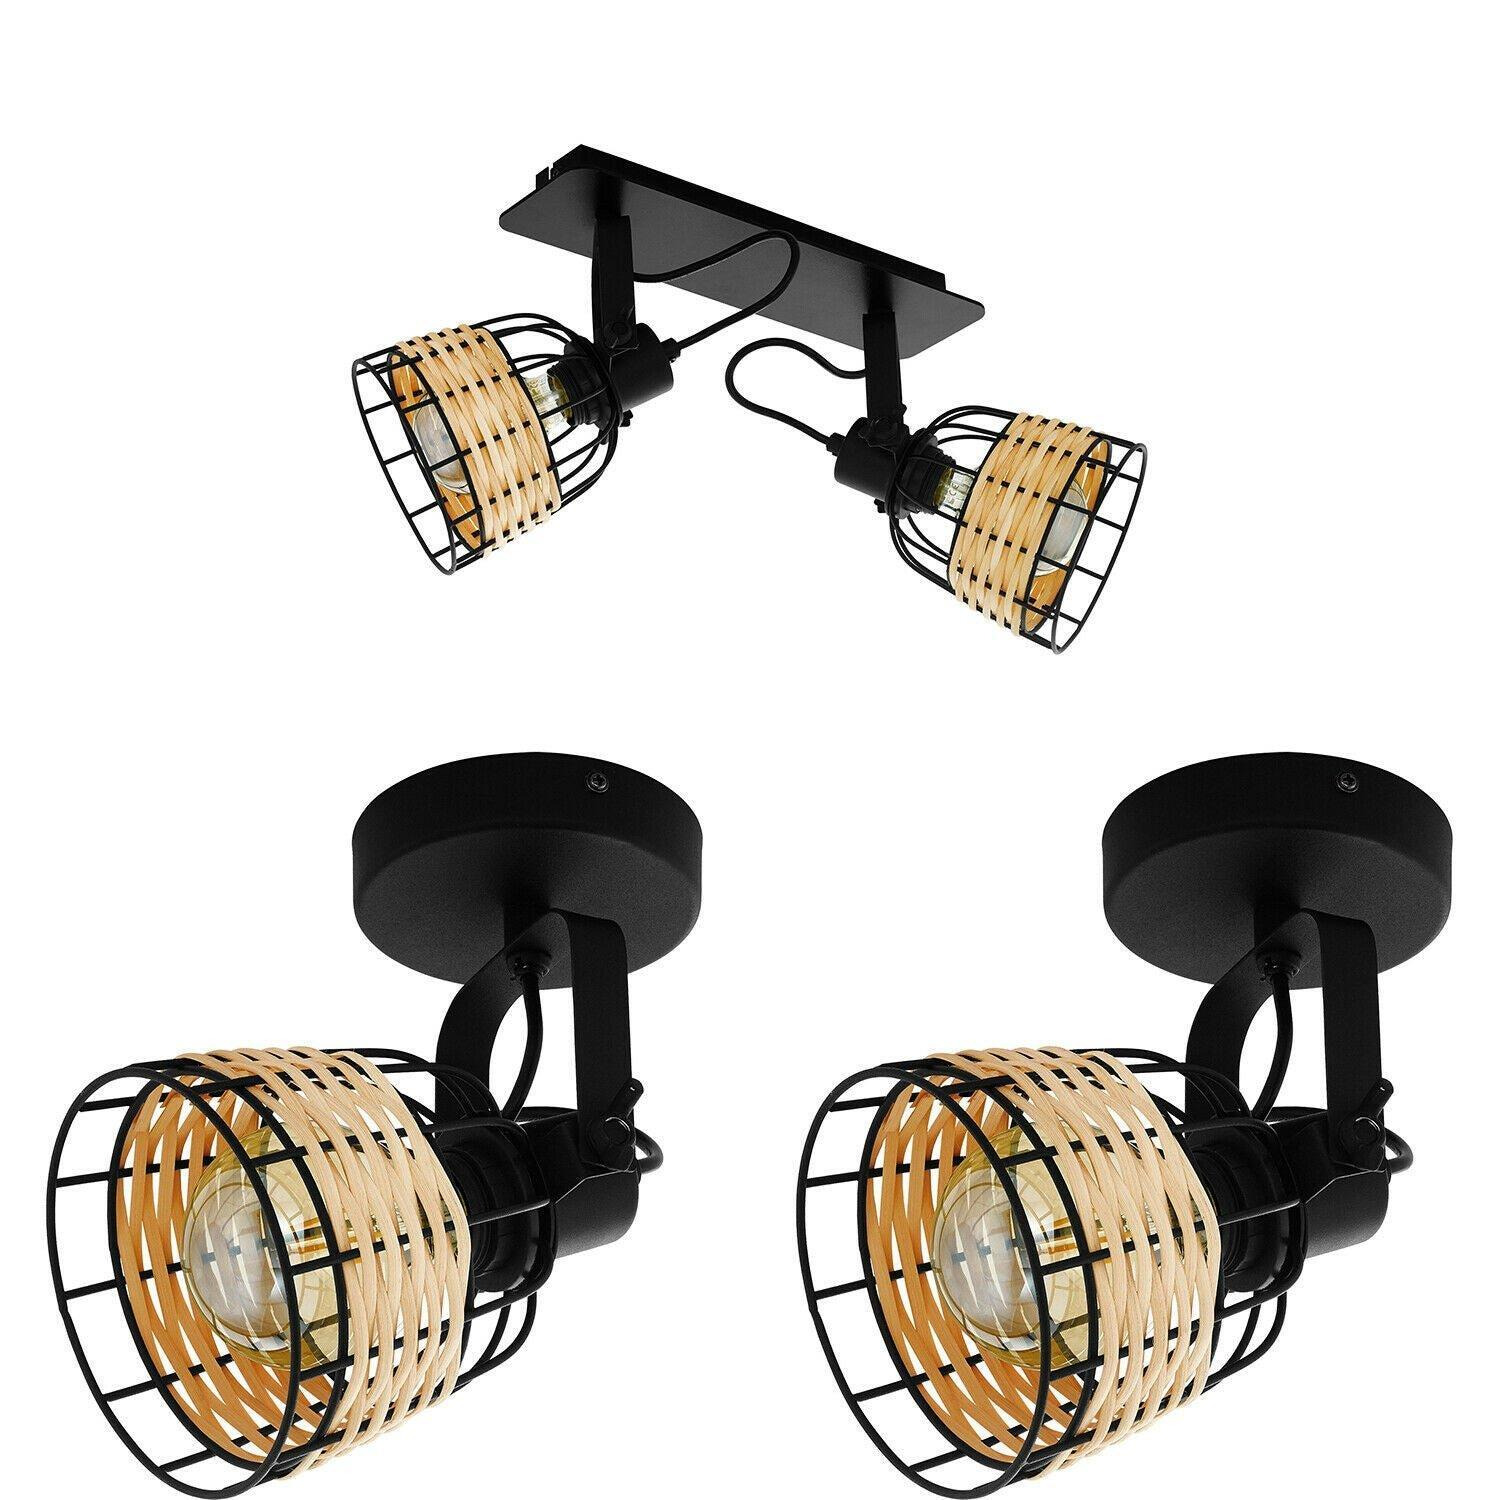 Twin Ceiling Spot Light & 2x Matching Wall Lights Black Wicker Shade Moving Head - image 1